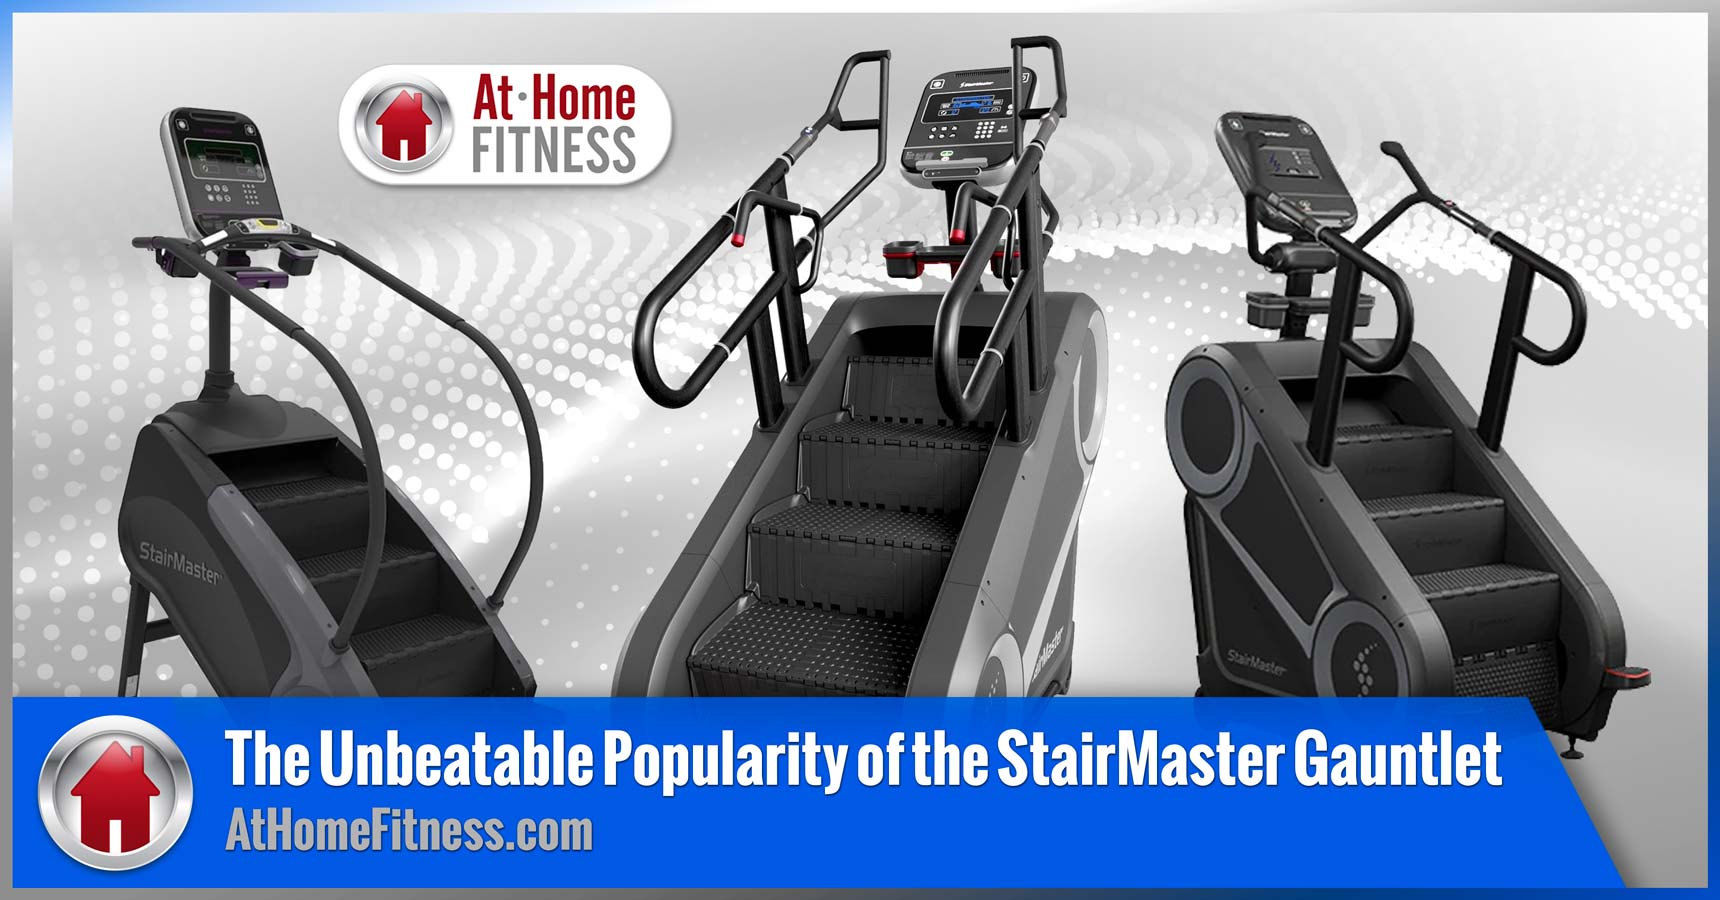 Mastering Fitness: The Unbeatable Popularity of the StairMaster Gauntlet